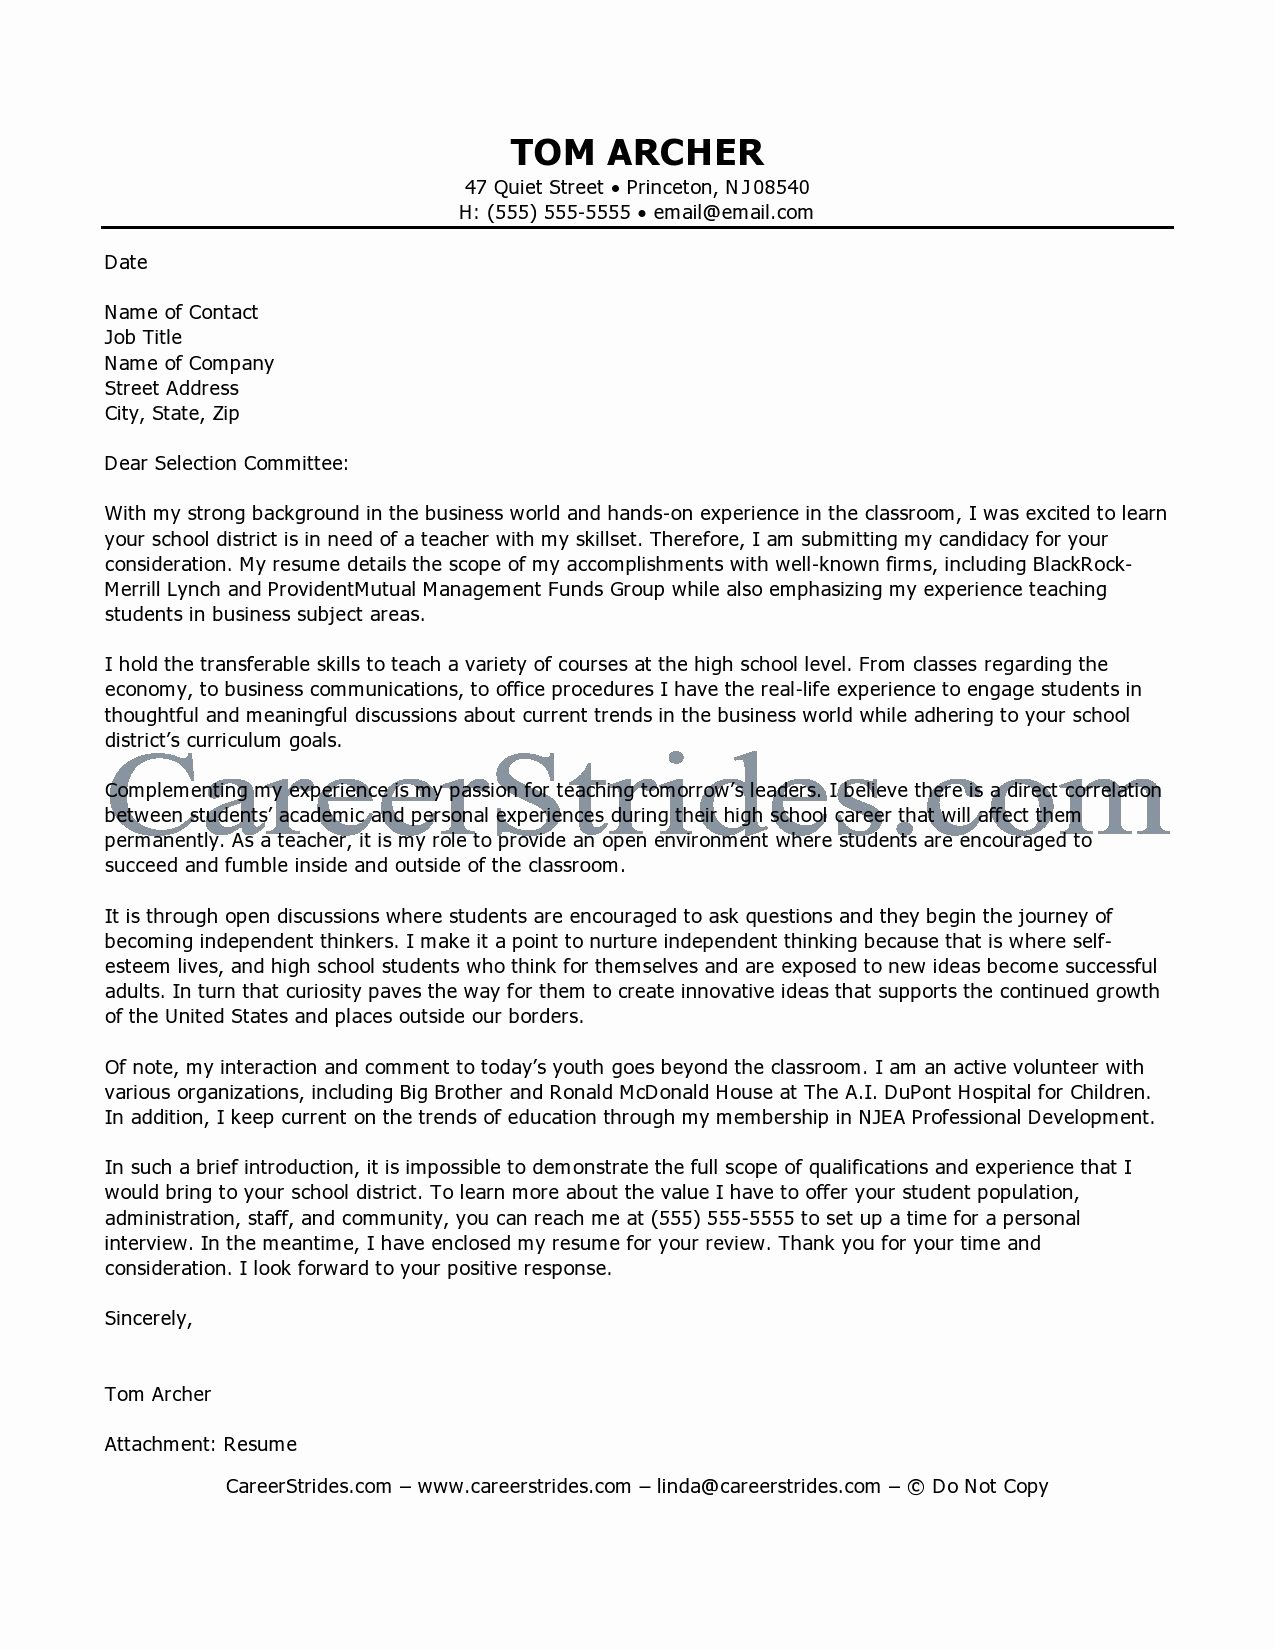 High School Teacher Cover Letter Awesome Teaching Cover Letters Careerstridesbusiness